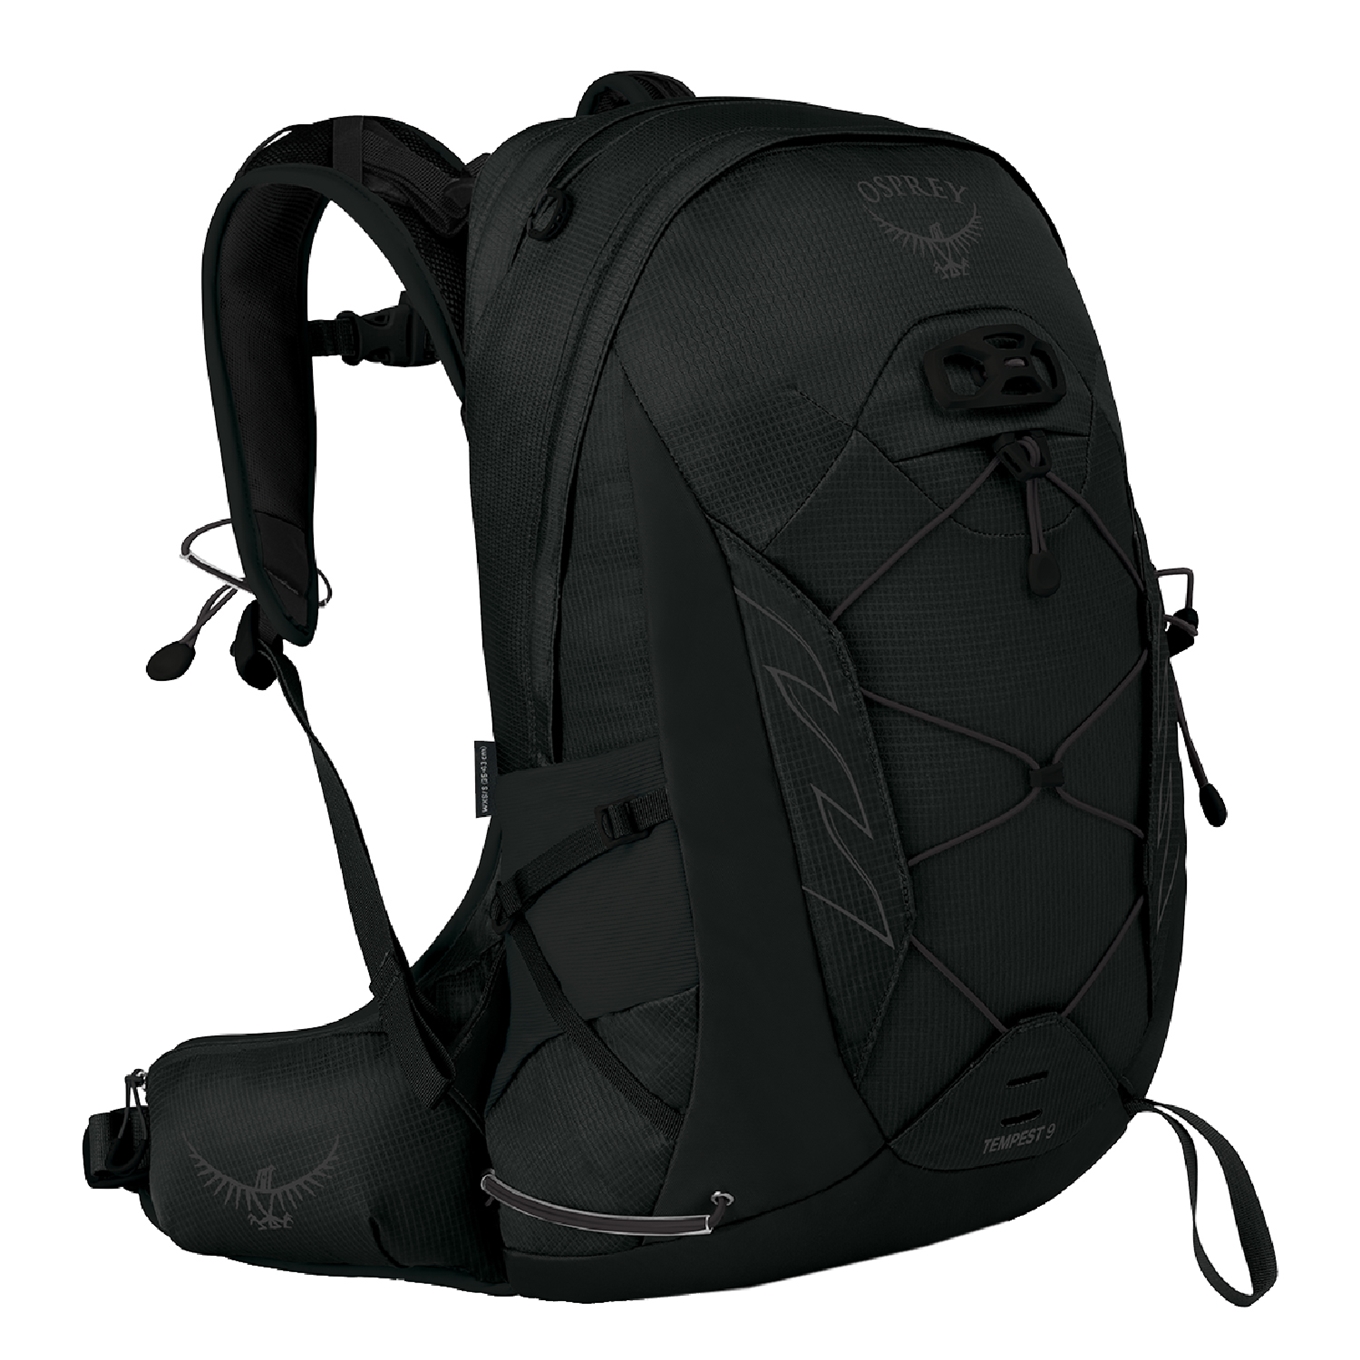 Osprey Tempest 9 Women&apos;s Backpack XS/S stealth black backpack